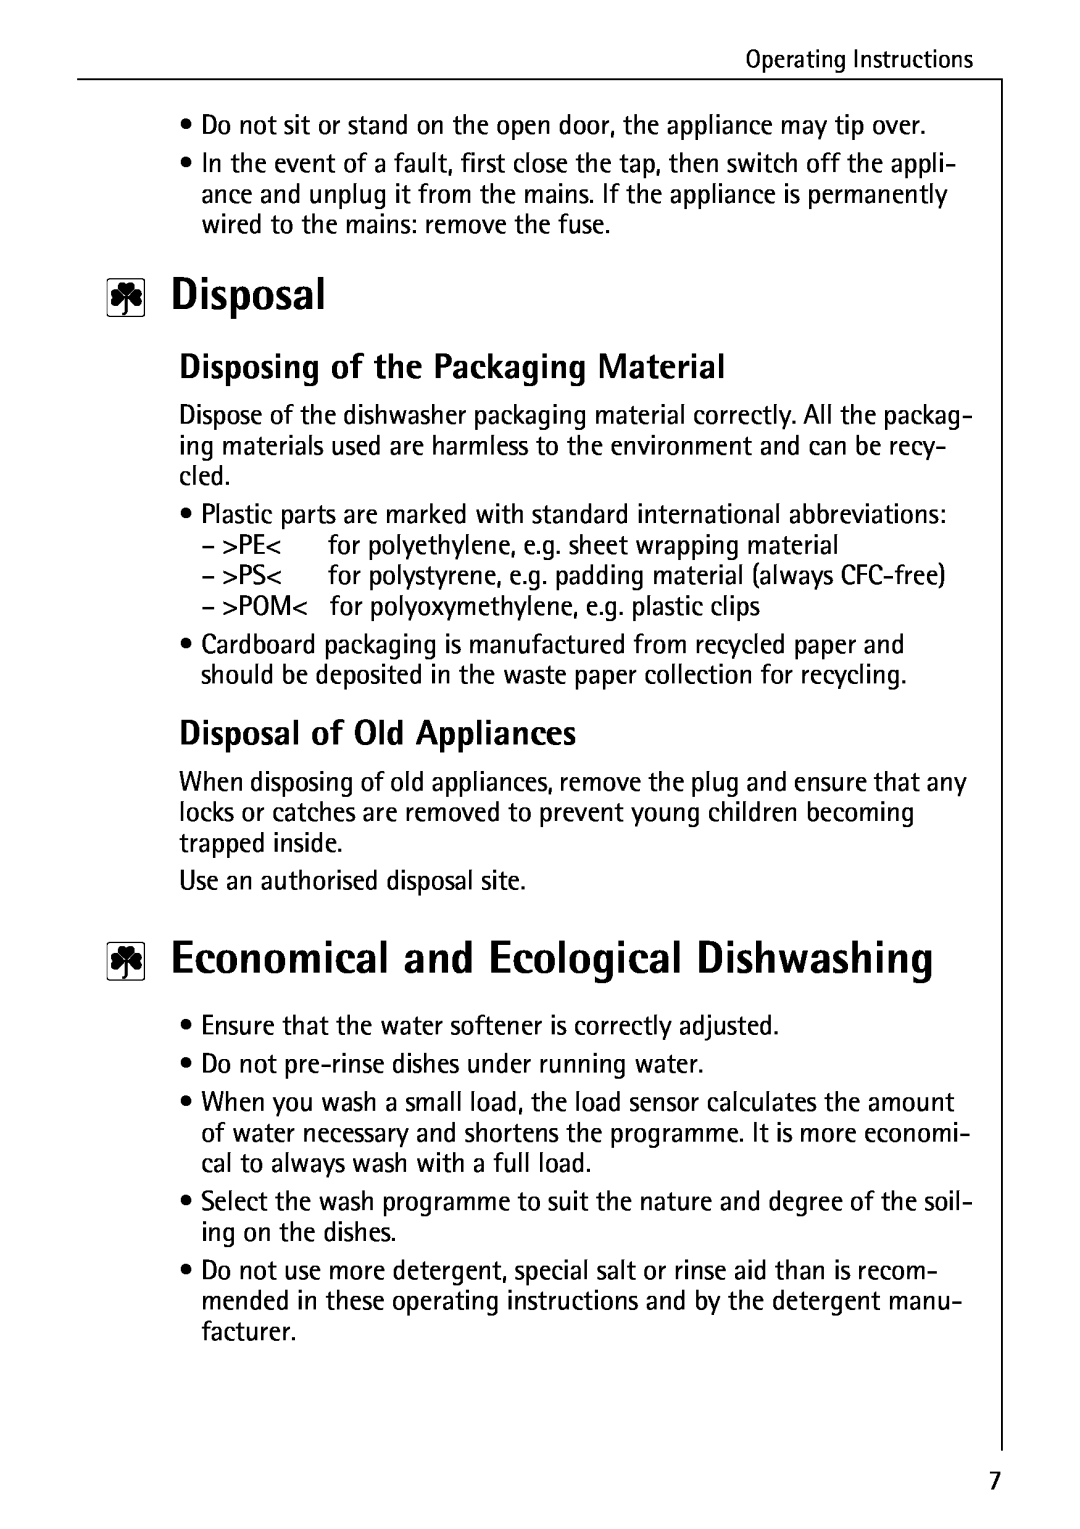 Electrolux 60820 manual Disposal, Economical and Ecological Dishwashing, Disposing of the Packaging Material 